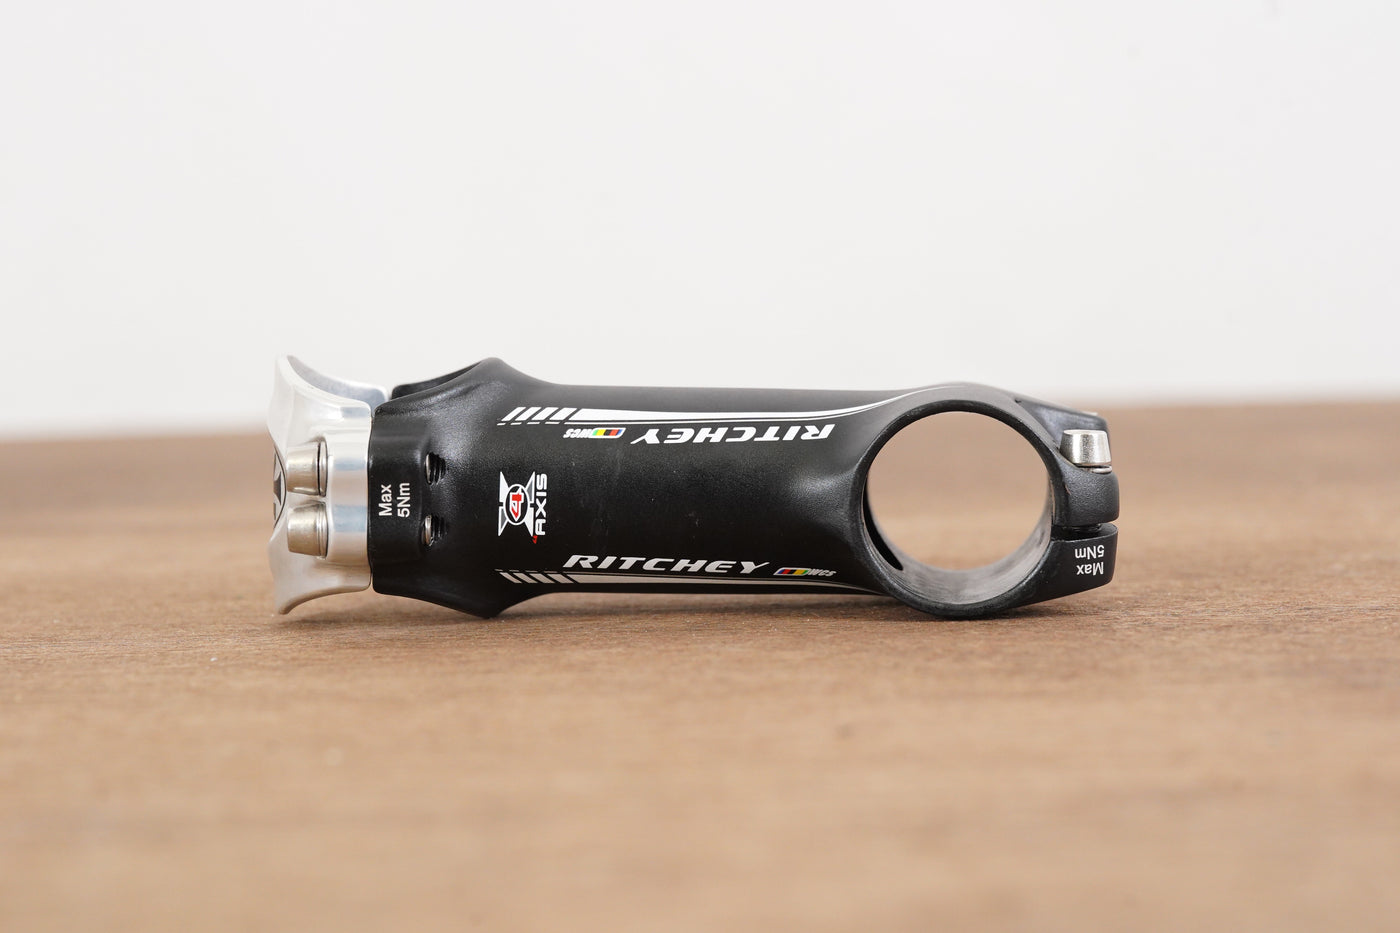 Ritchey WCS 4 Axis 90mm ±6 Degree Alloy Road Stem 108g 1 1/8" 31.8mm